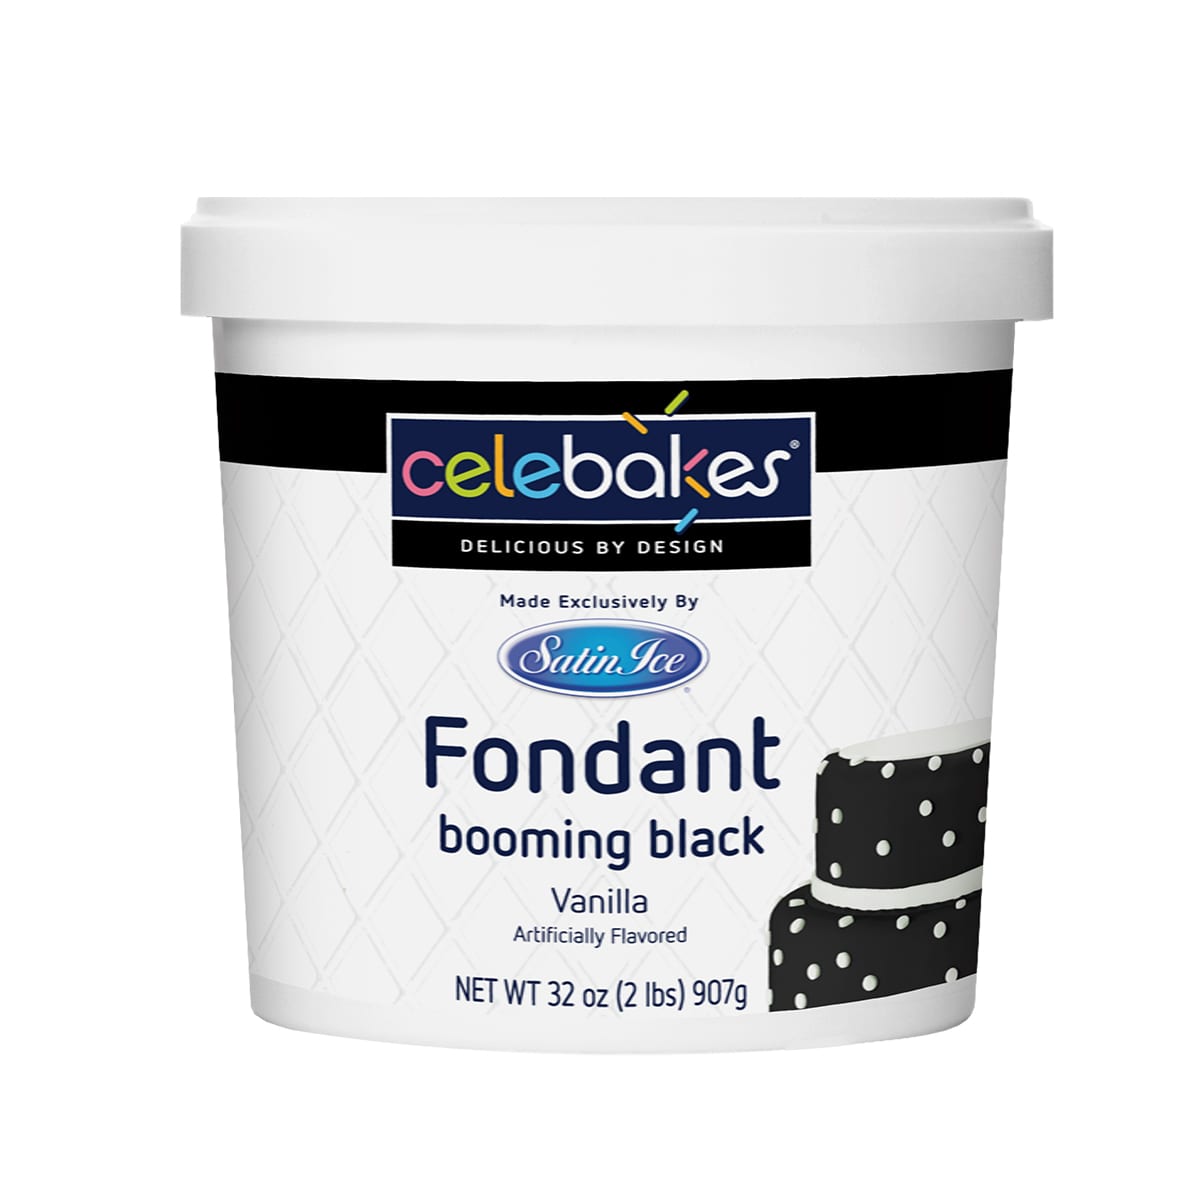 Booming Black Fondant - High Quality, Great Tasting Baking Products and  Ingredients, Made By Bakers, for Bakers.